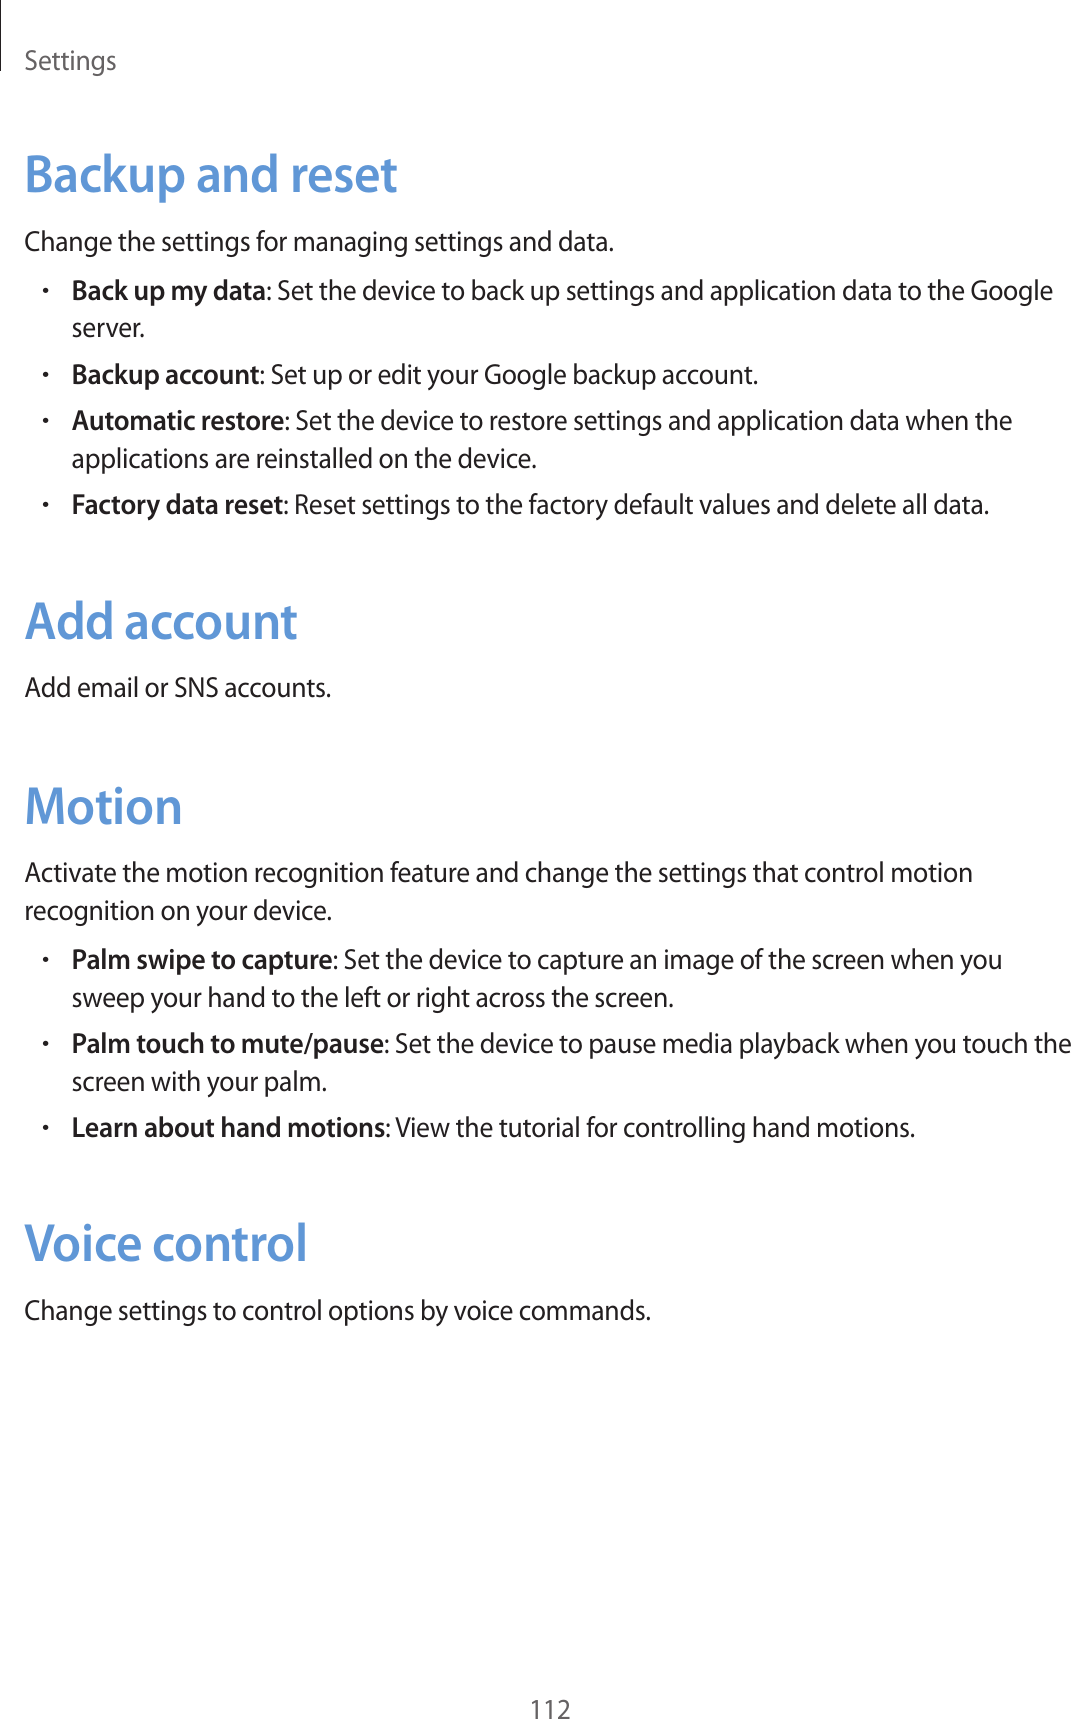 Settings112Backup and resetChange the settings for managing settings and data.•Back up my data: Set the device to back up settings and application data to the Google server.•Backup account: Set up or edit your Google backup account.•Automatic restore: Set the device to restore settings and application data when the applications are reinstalled on the device.•Factory data reset: Reset settings to the factory default values and delete all data.Add accountAdd email or SNS accounts.MotionActivate the motion recognition feature and change the settings that control motion recognition on your device.•Palm swipe to capture: Set the device to capture an image of the screen when you sweep your hand to the left or right across the screen.•Palm touch to mute/pause: Set the device to pause media playback when you touch the screen with your palm.•Learn about hand motions: View the tutorial for controlling hand motions.Voice controlChange settings to control options by voice commands.